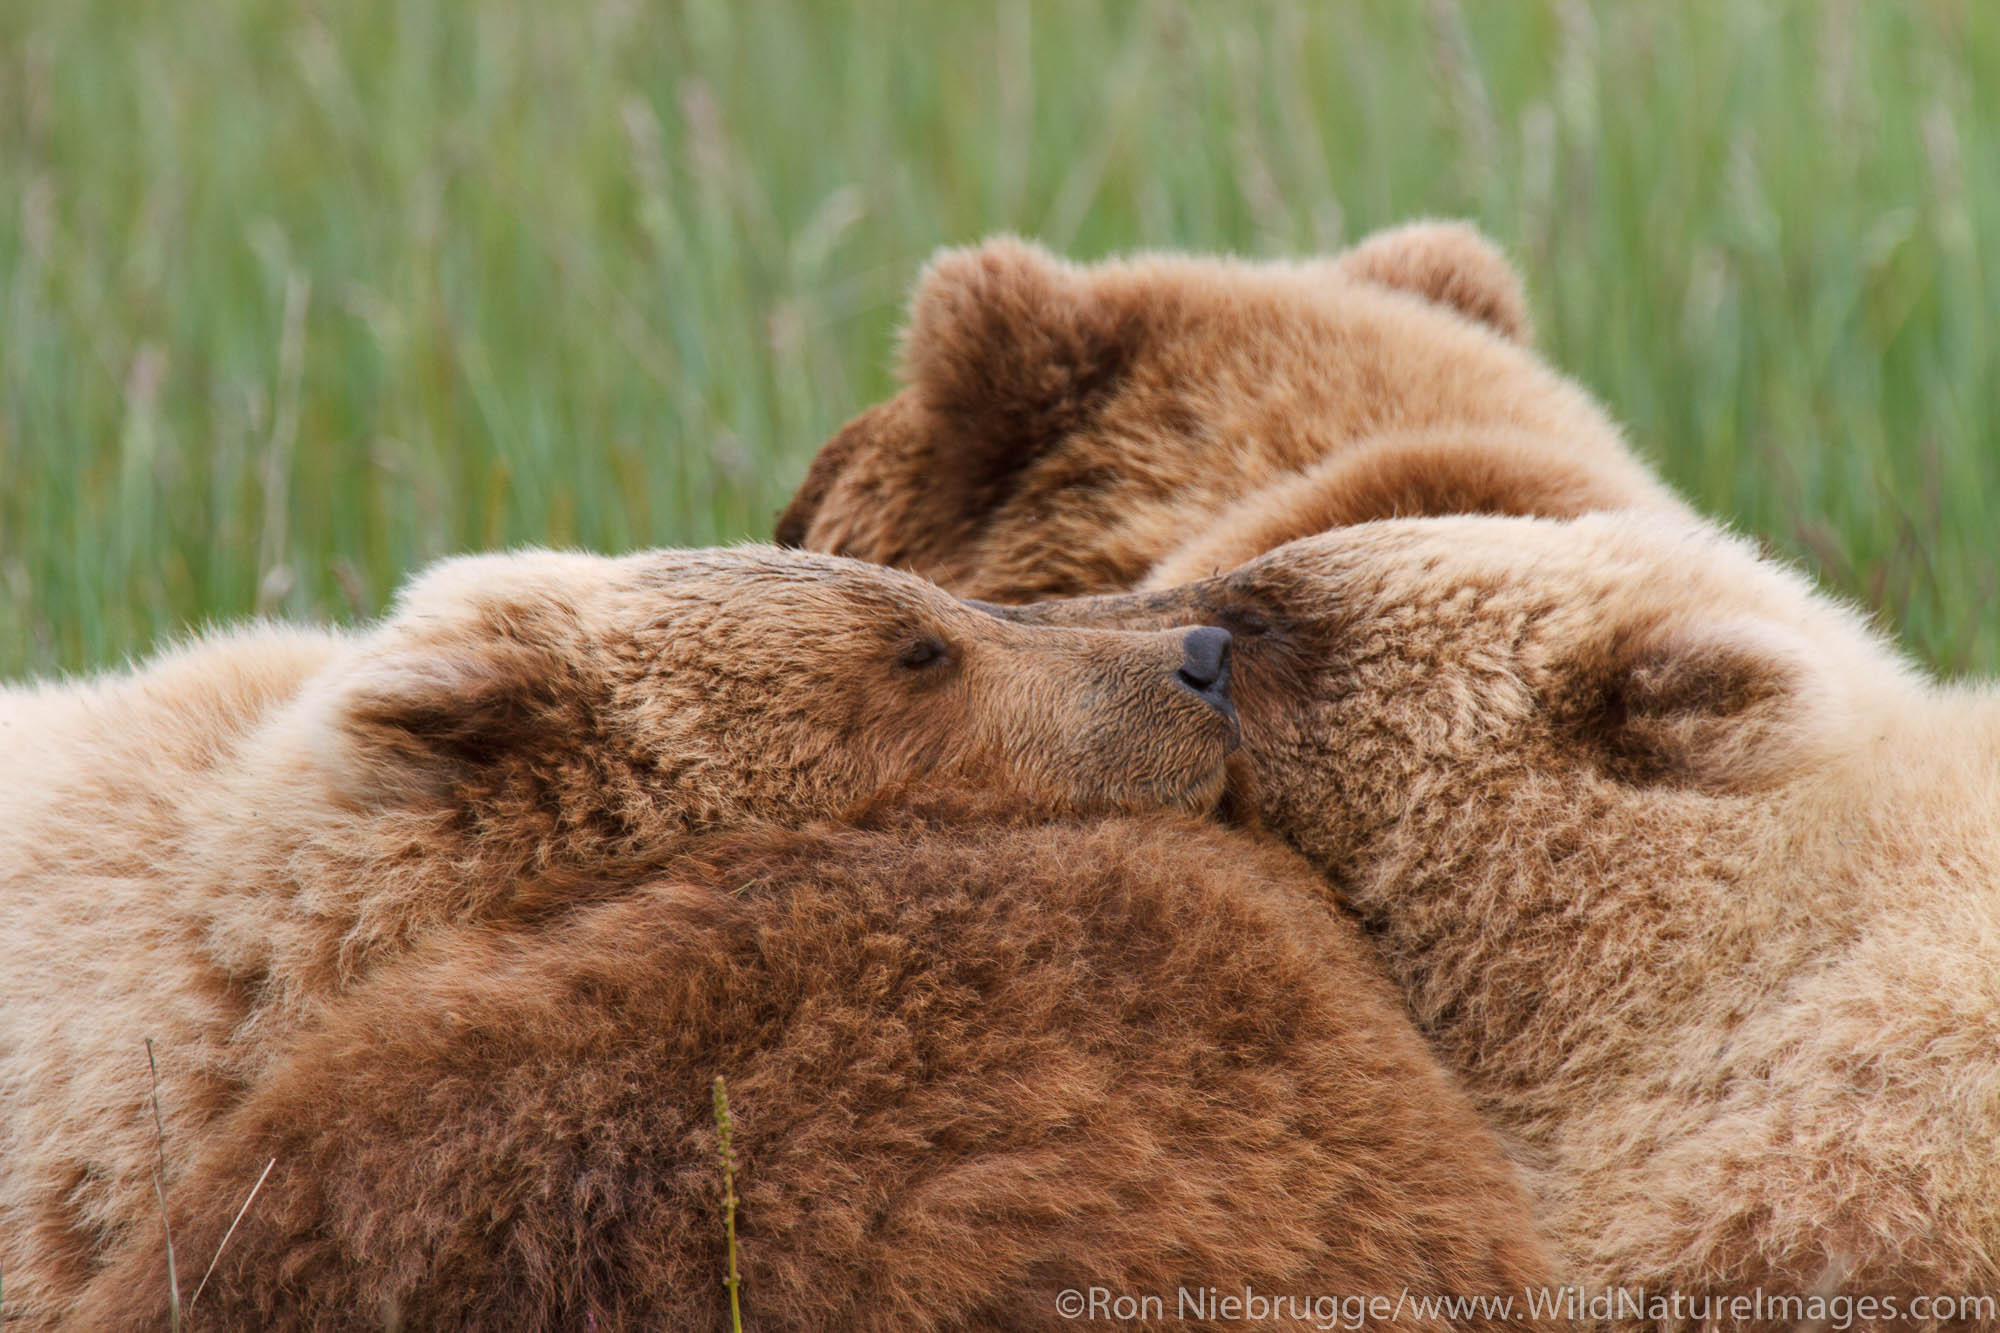 A Brown or Grizzly Bear sow with cubs, Lake Clark National Park, Alaska.